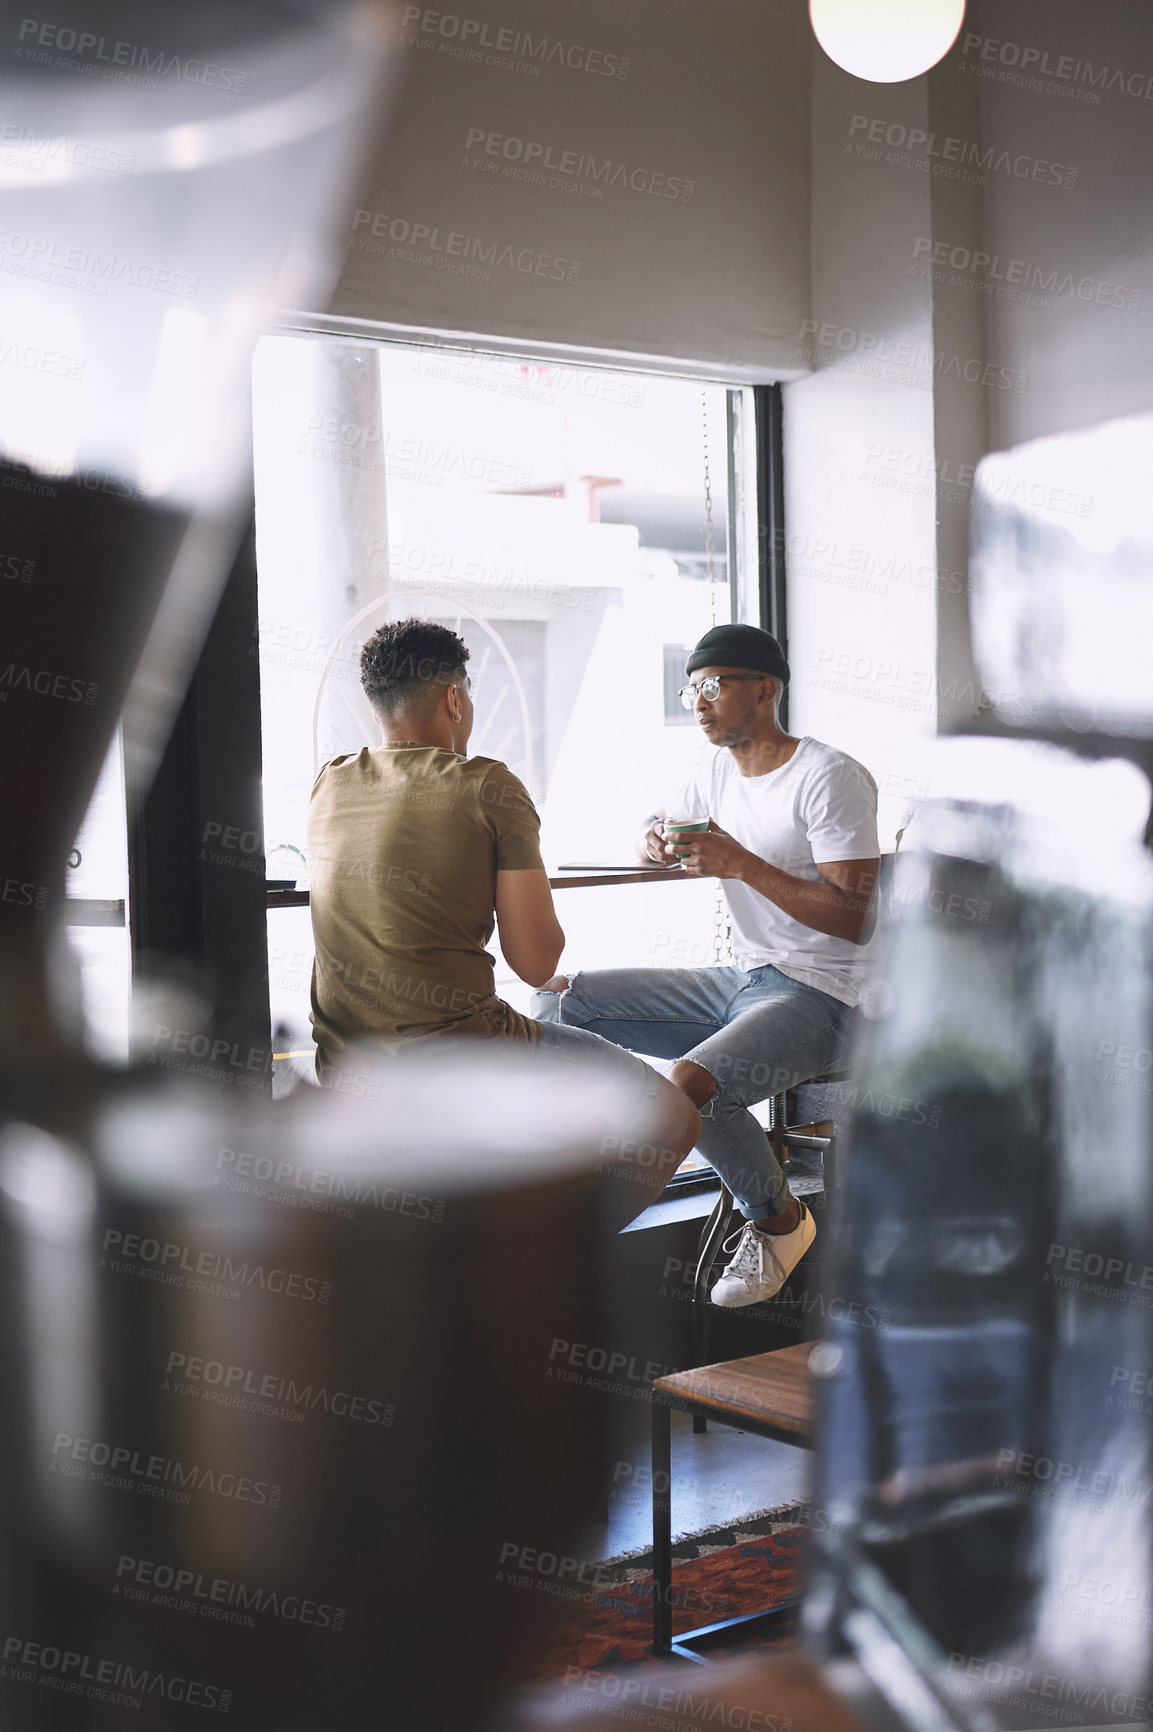 Buy stock photo Shot of two young men talking while having coffee together in a cafe